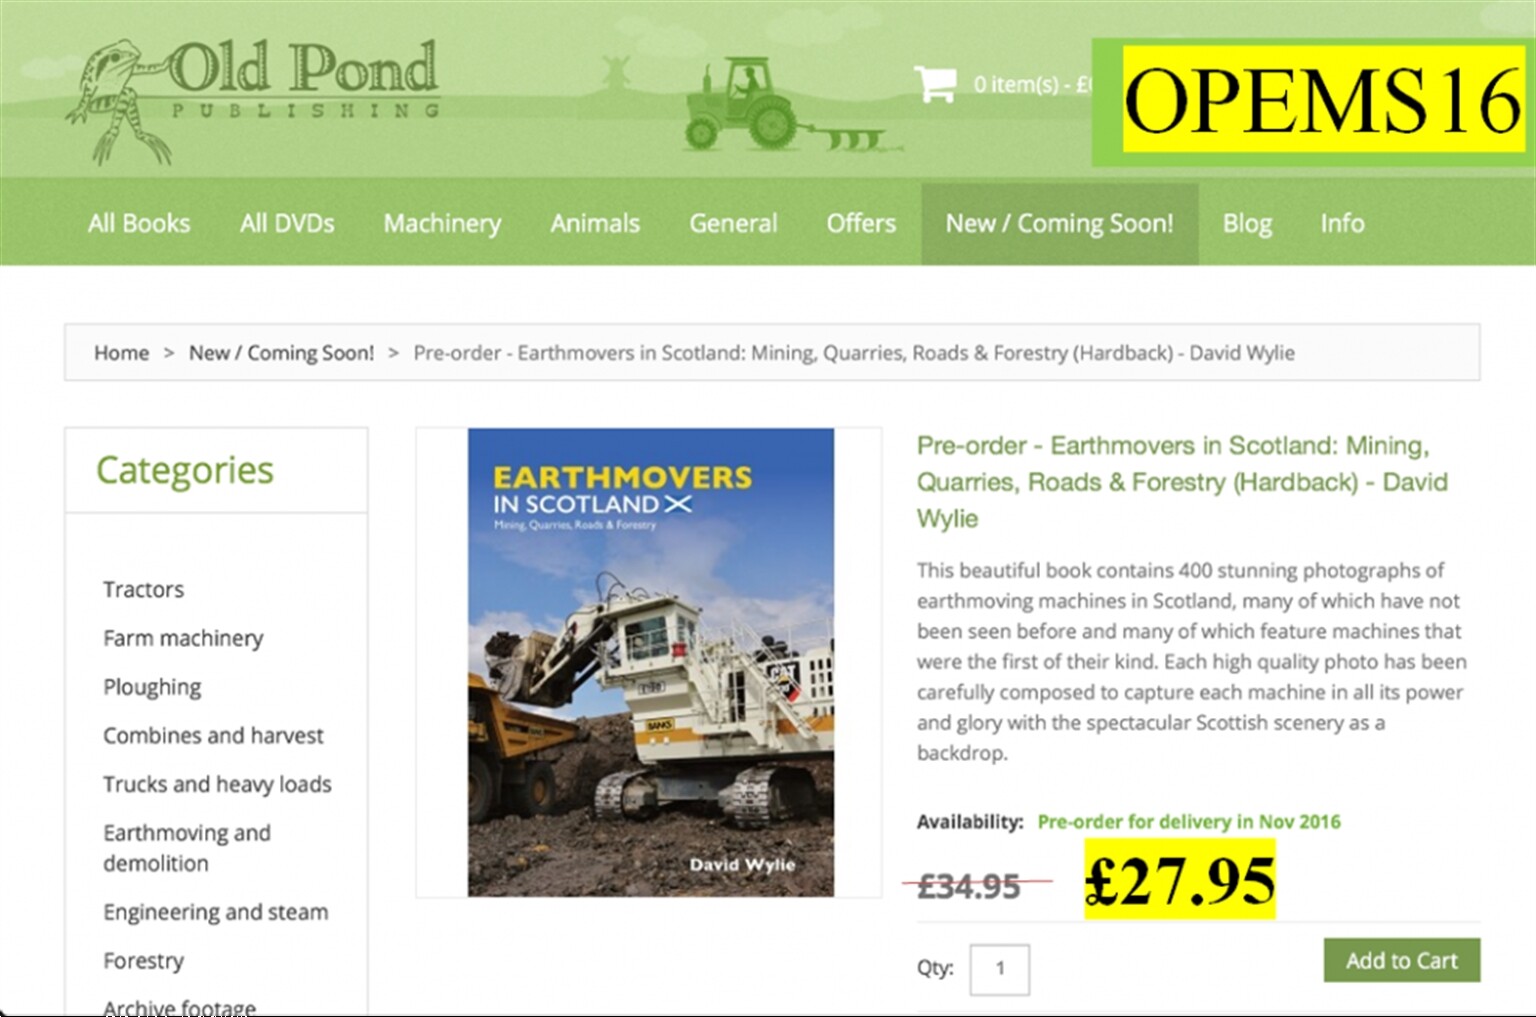 Exclusive Digger Man Blog readers offer for Earthmovers in Scotland